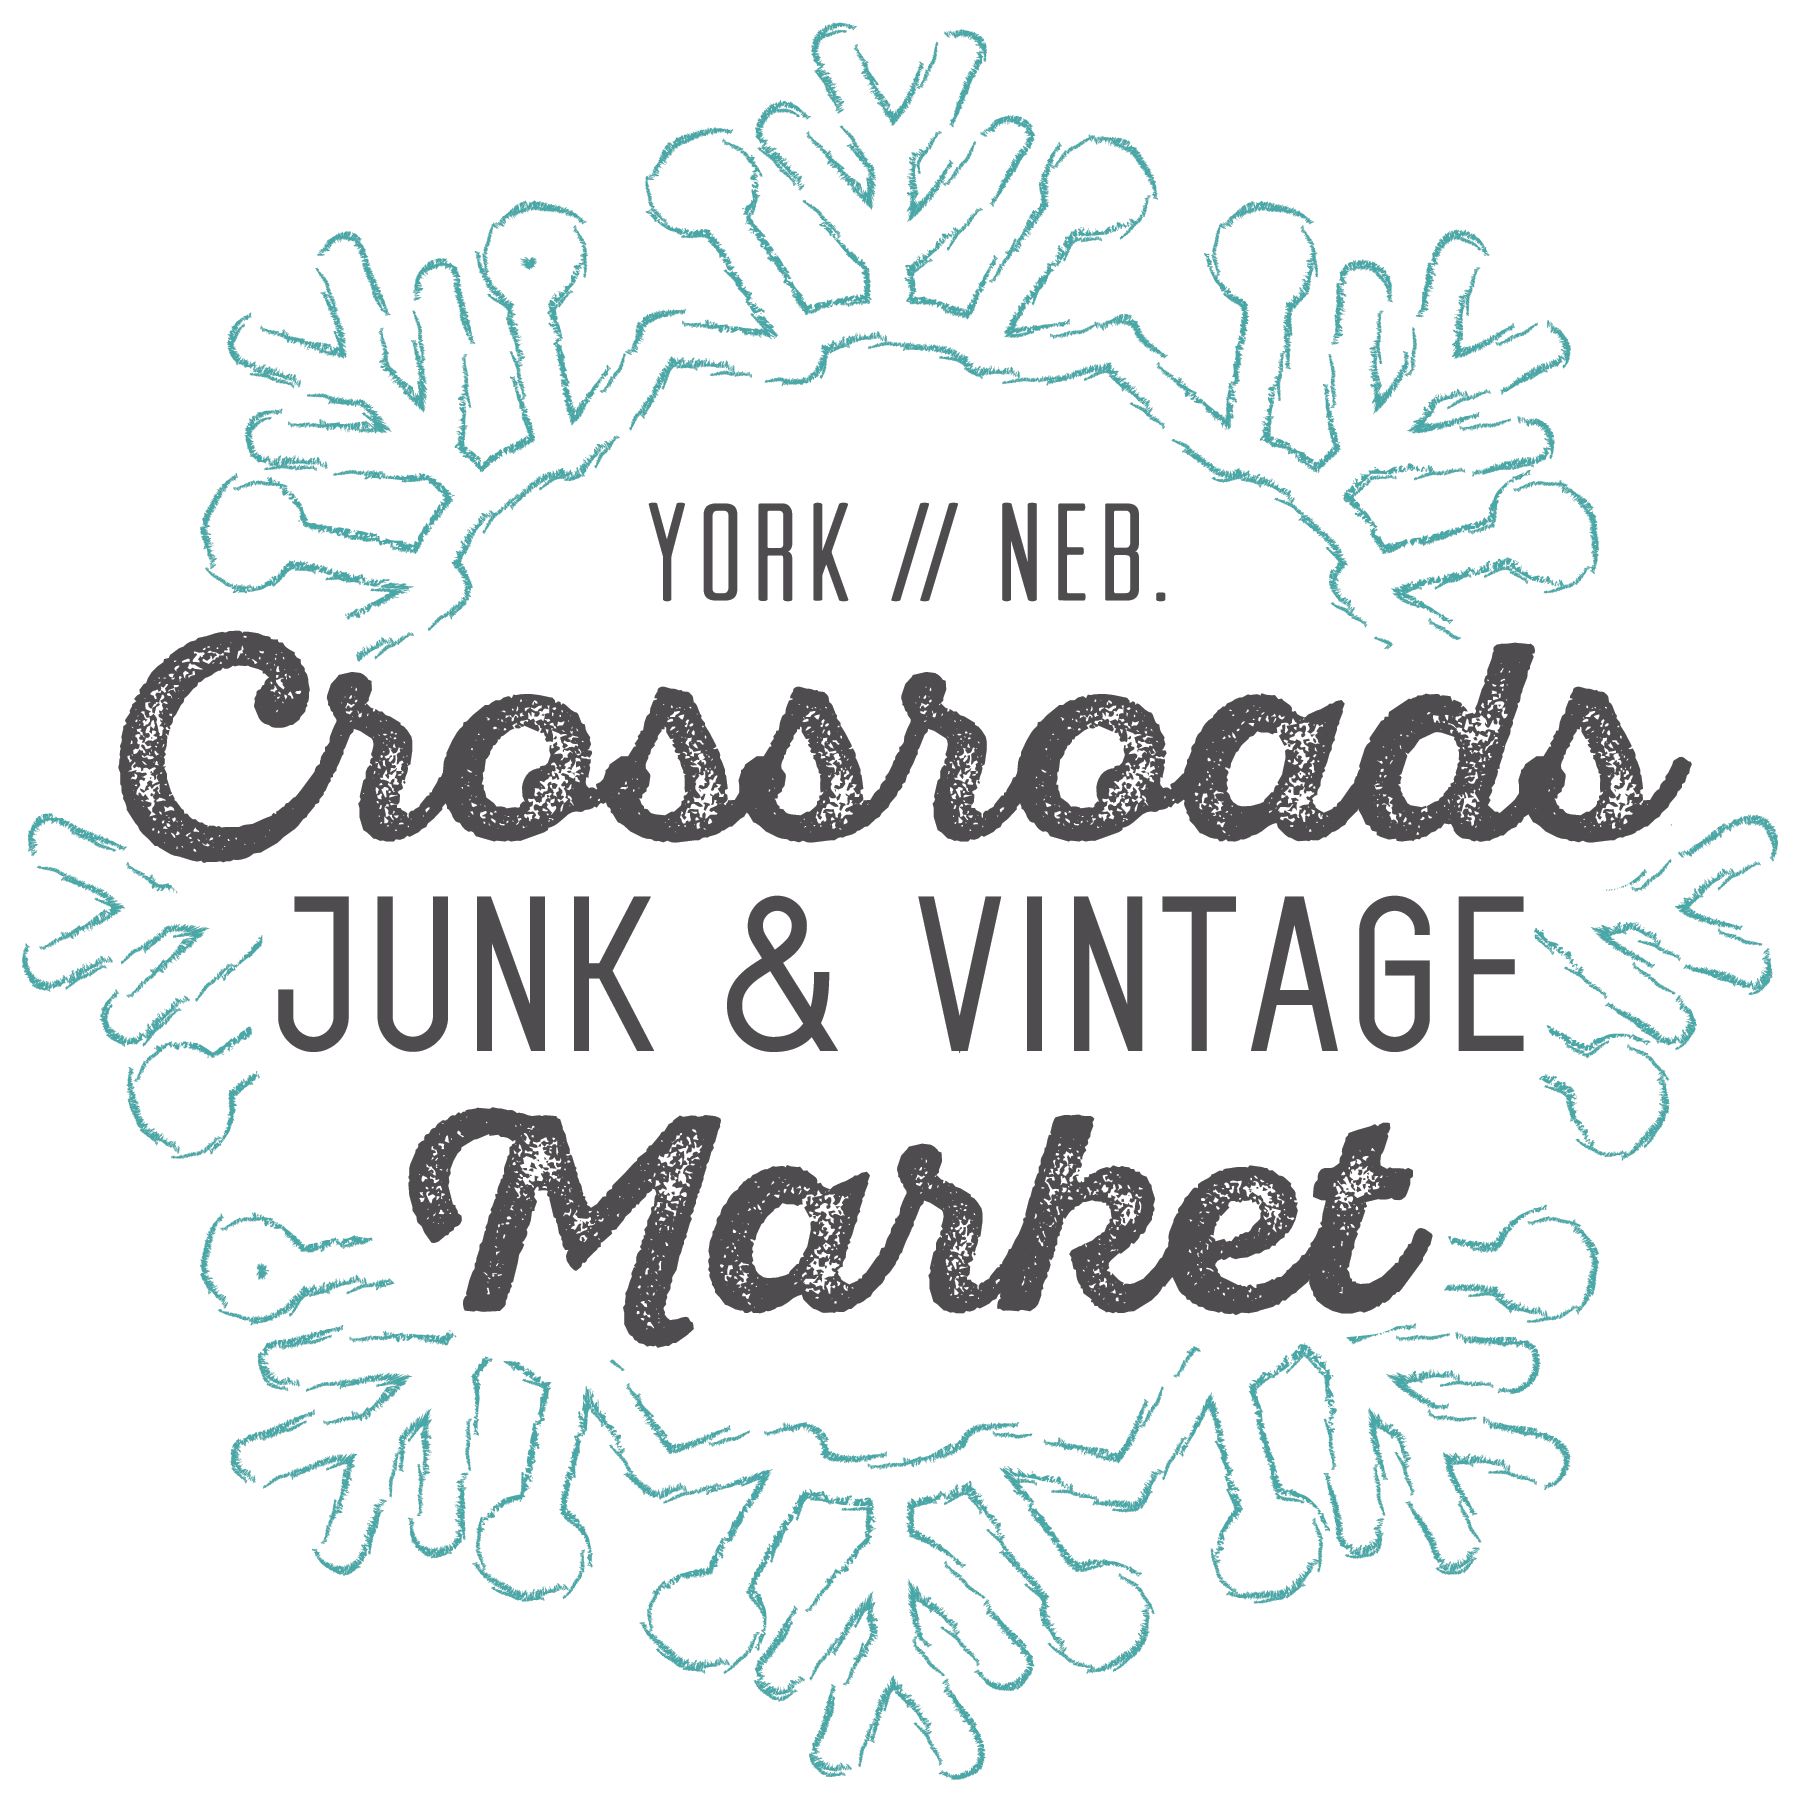 Join us for the Crossroads Junk & Vintage Holiday Market!